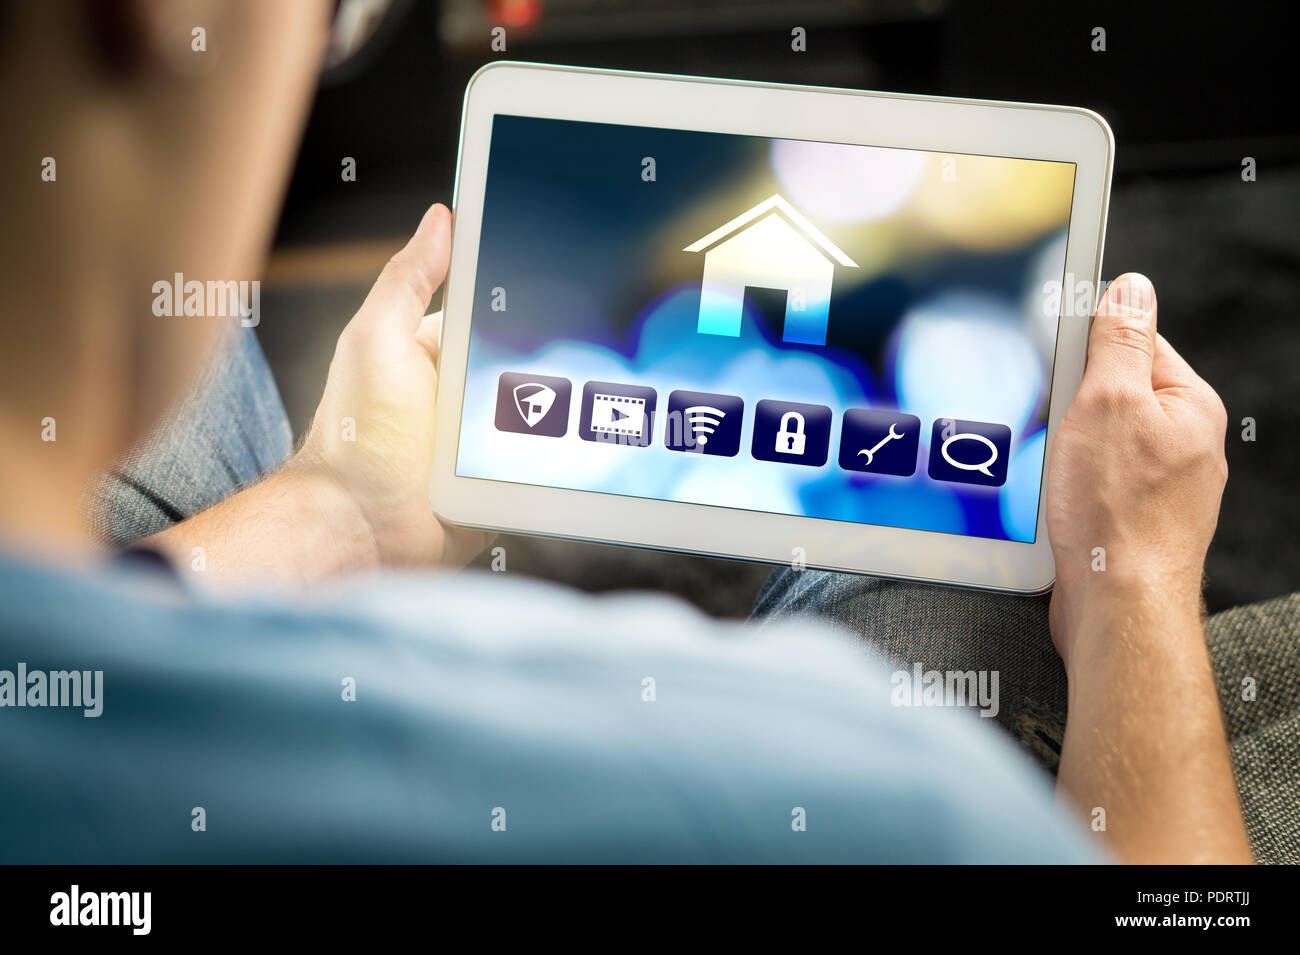 Man using smart home application in tablet to control house appliances. Internet of things (IOT) and remote controller app on smart device. Stock Photo